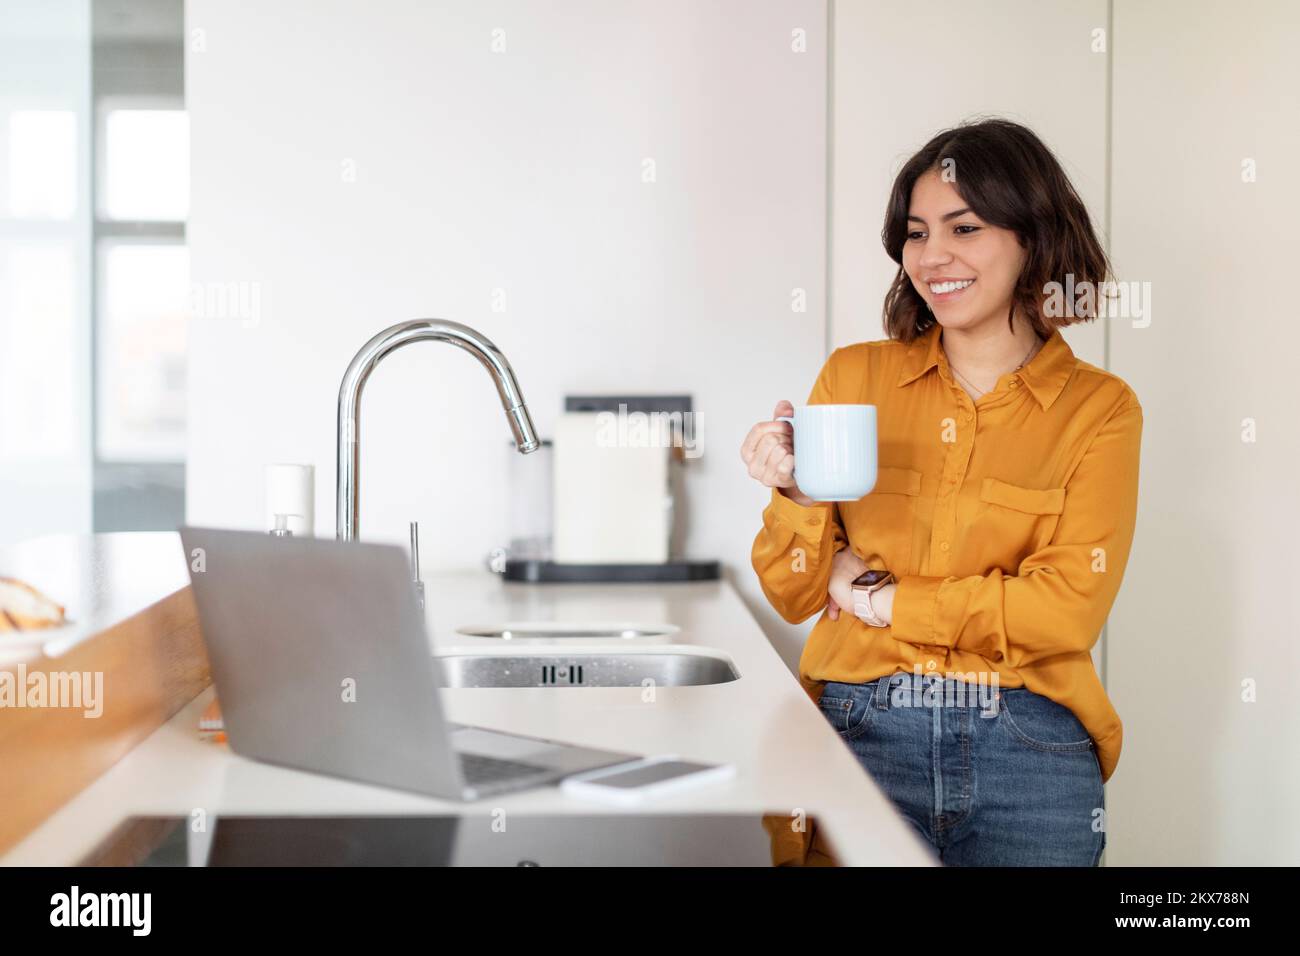 Young Smiling Arab Woman Using Laptop And Drinking Coffee In Kitchen Stock Photo